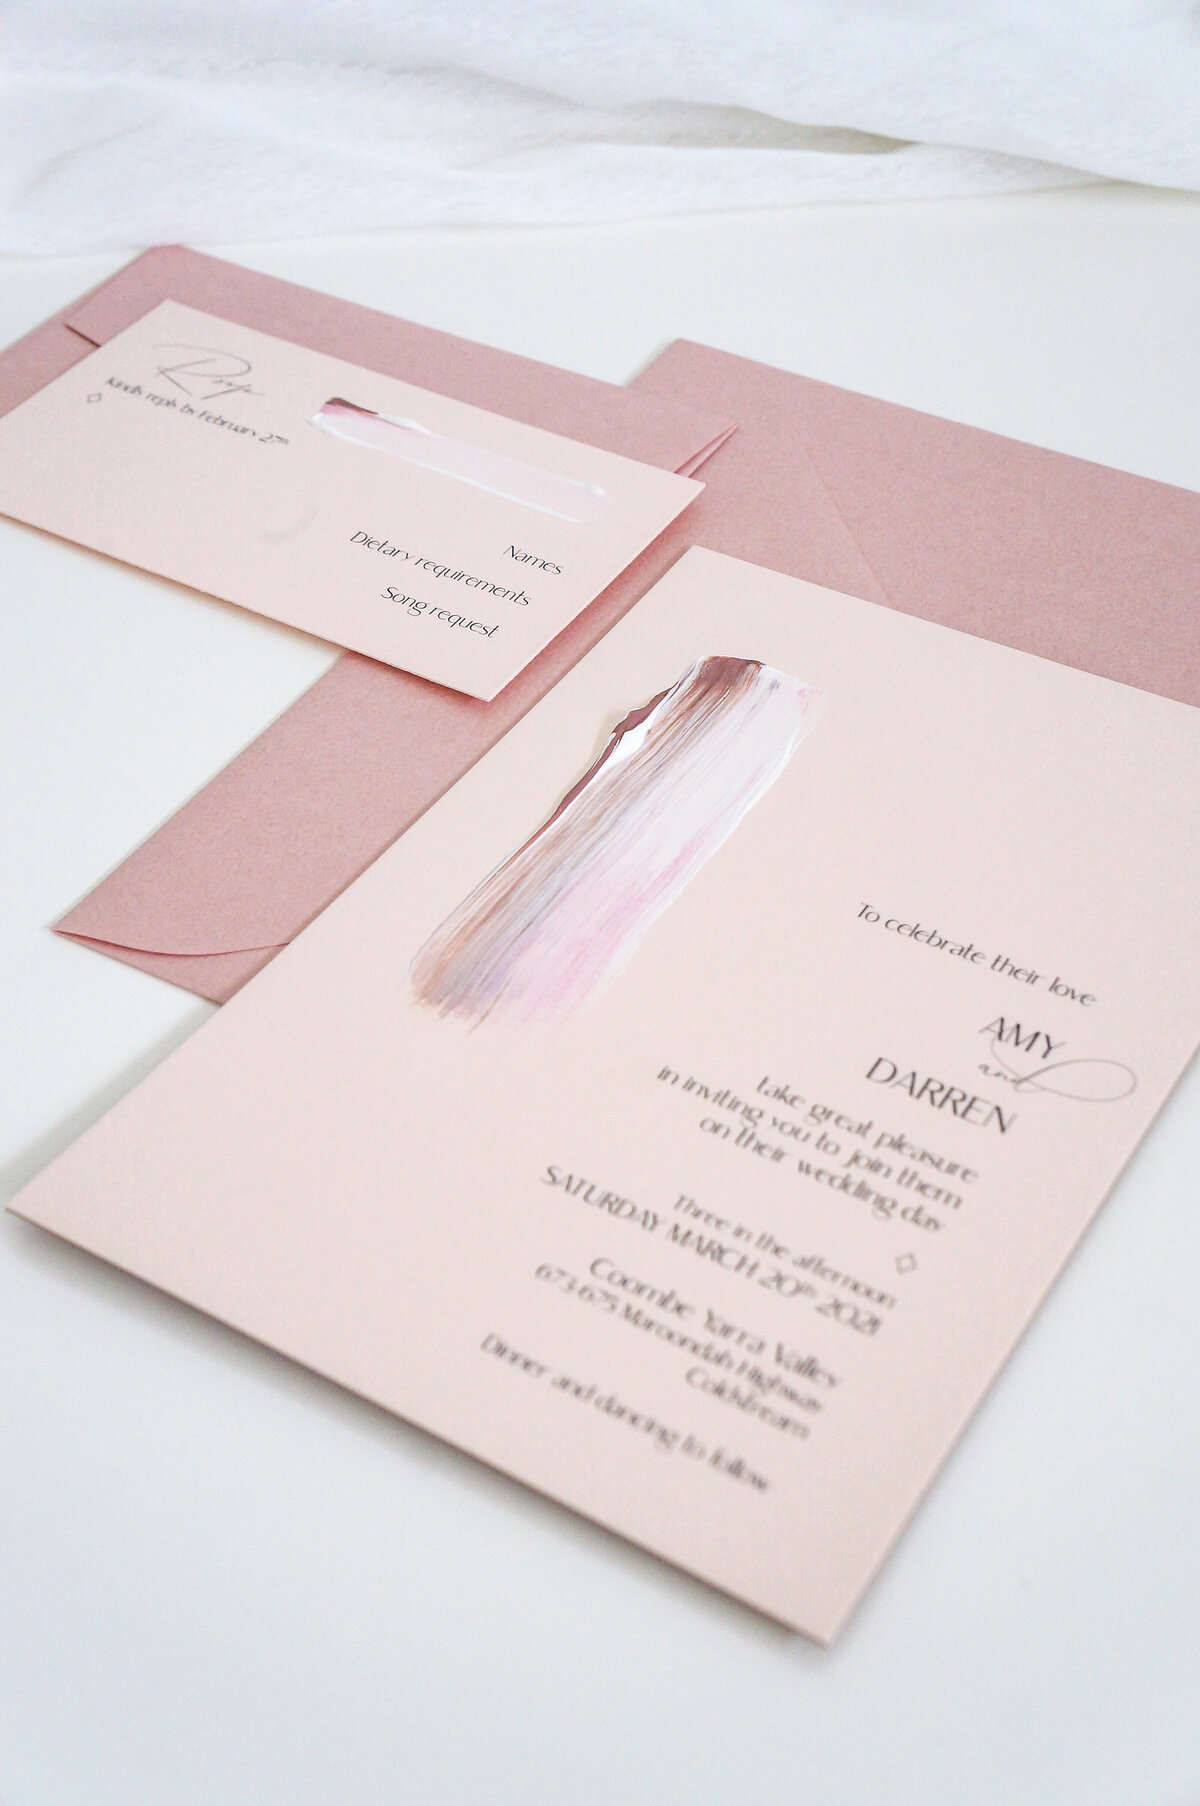 Dusky pink and brown painted wedding invitation and RSVP card with dusky pink envelopes